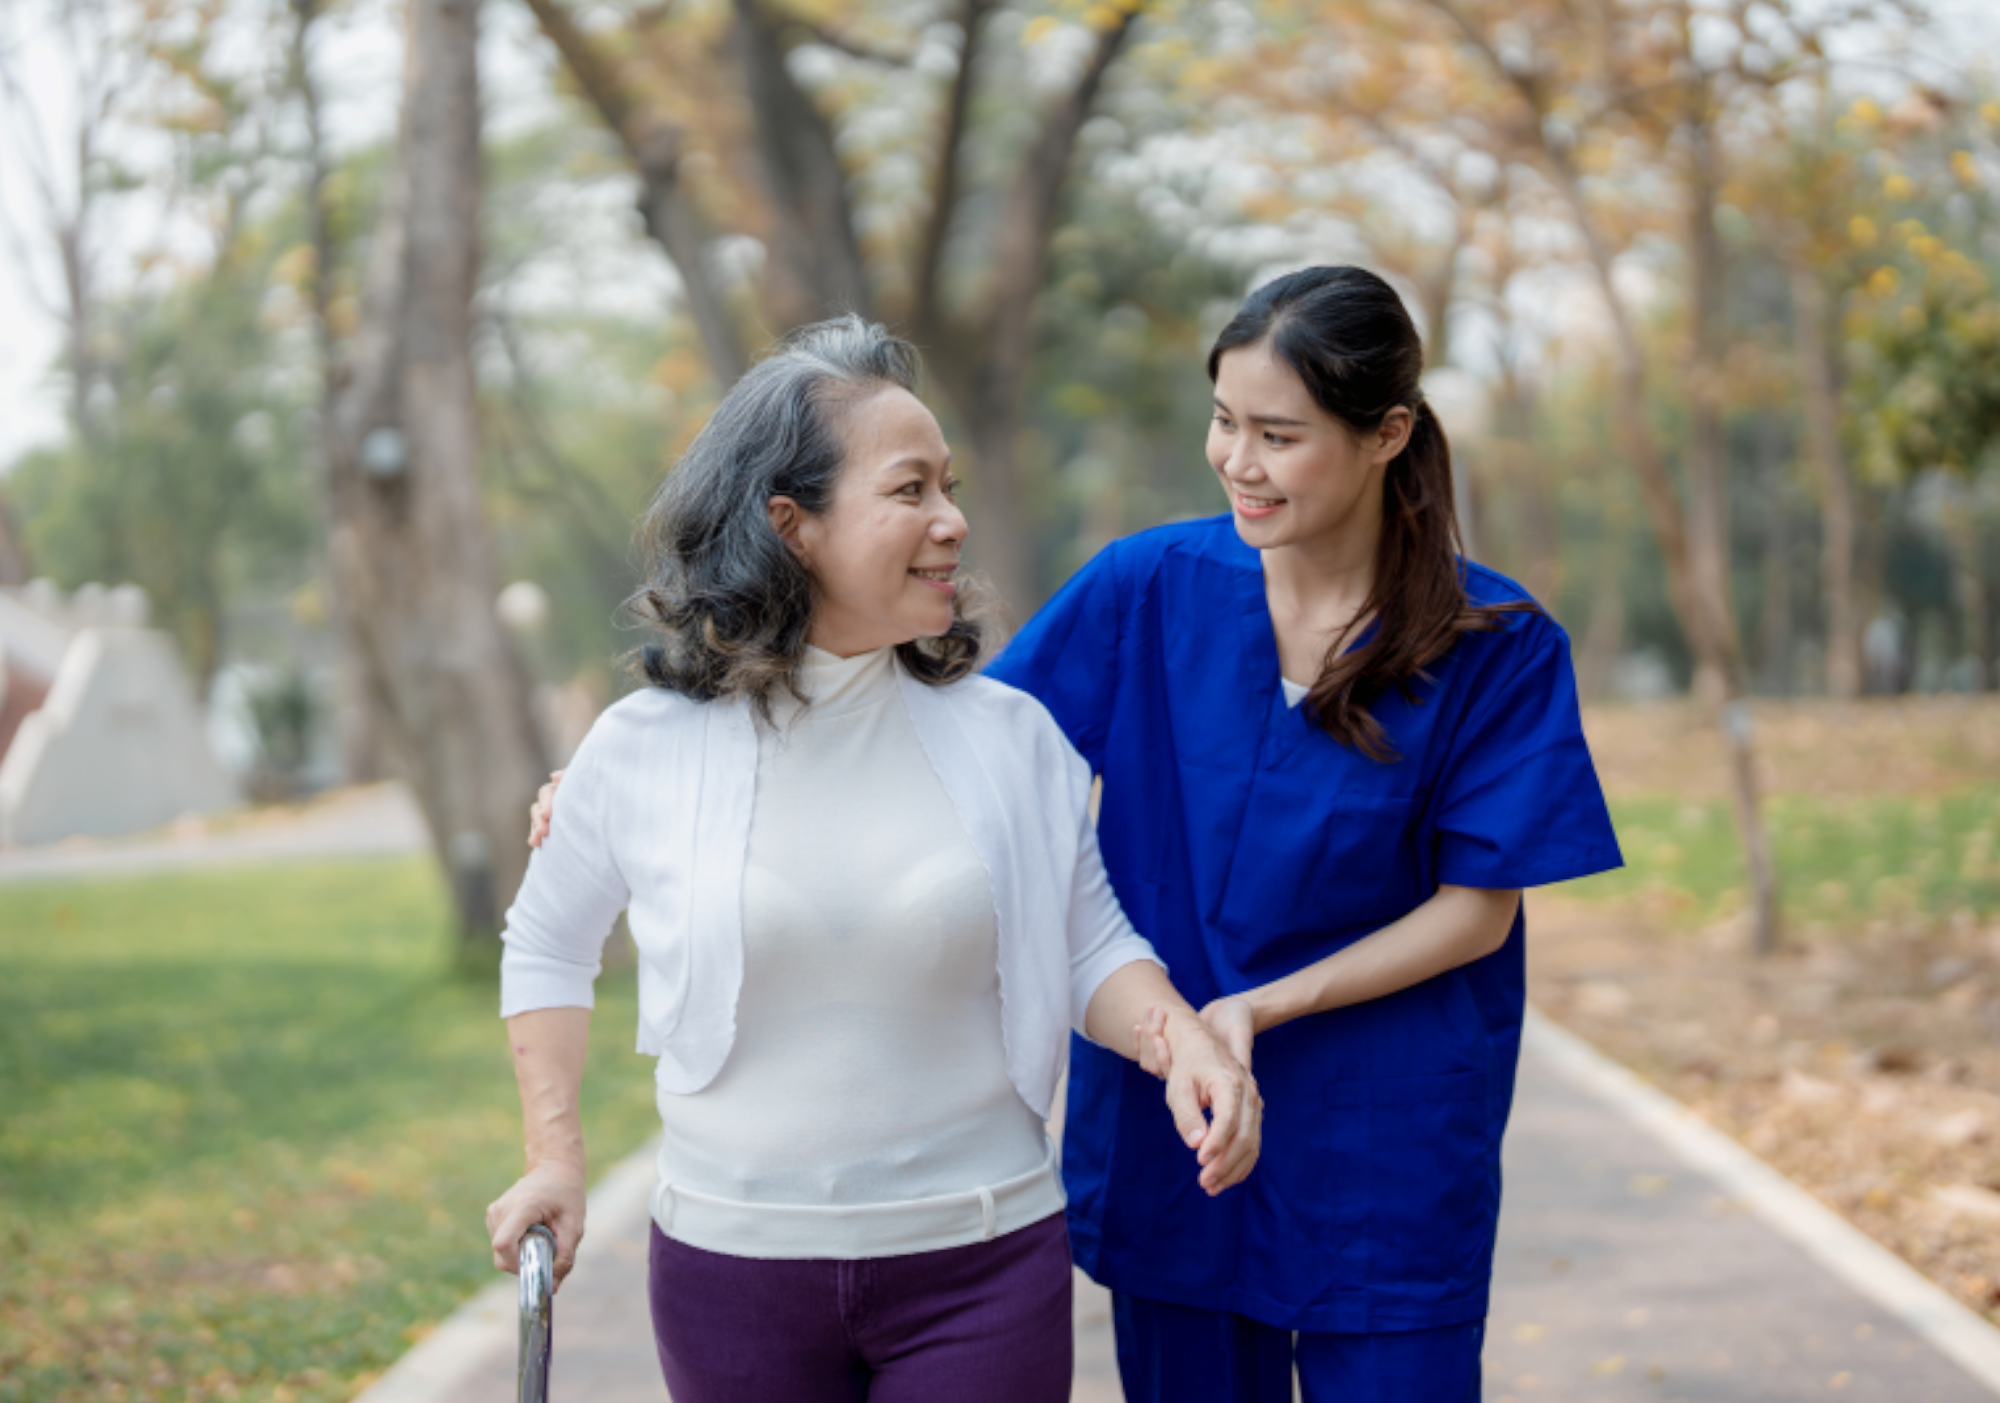 Why Choose Proxy Care Personnel